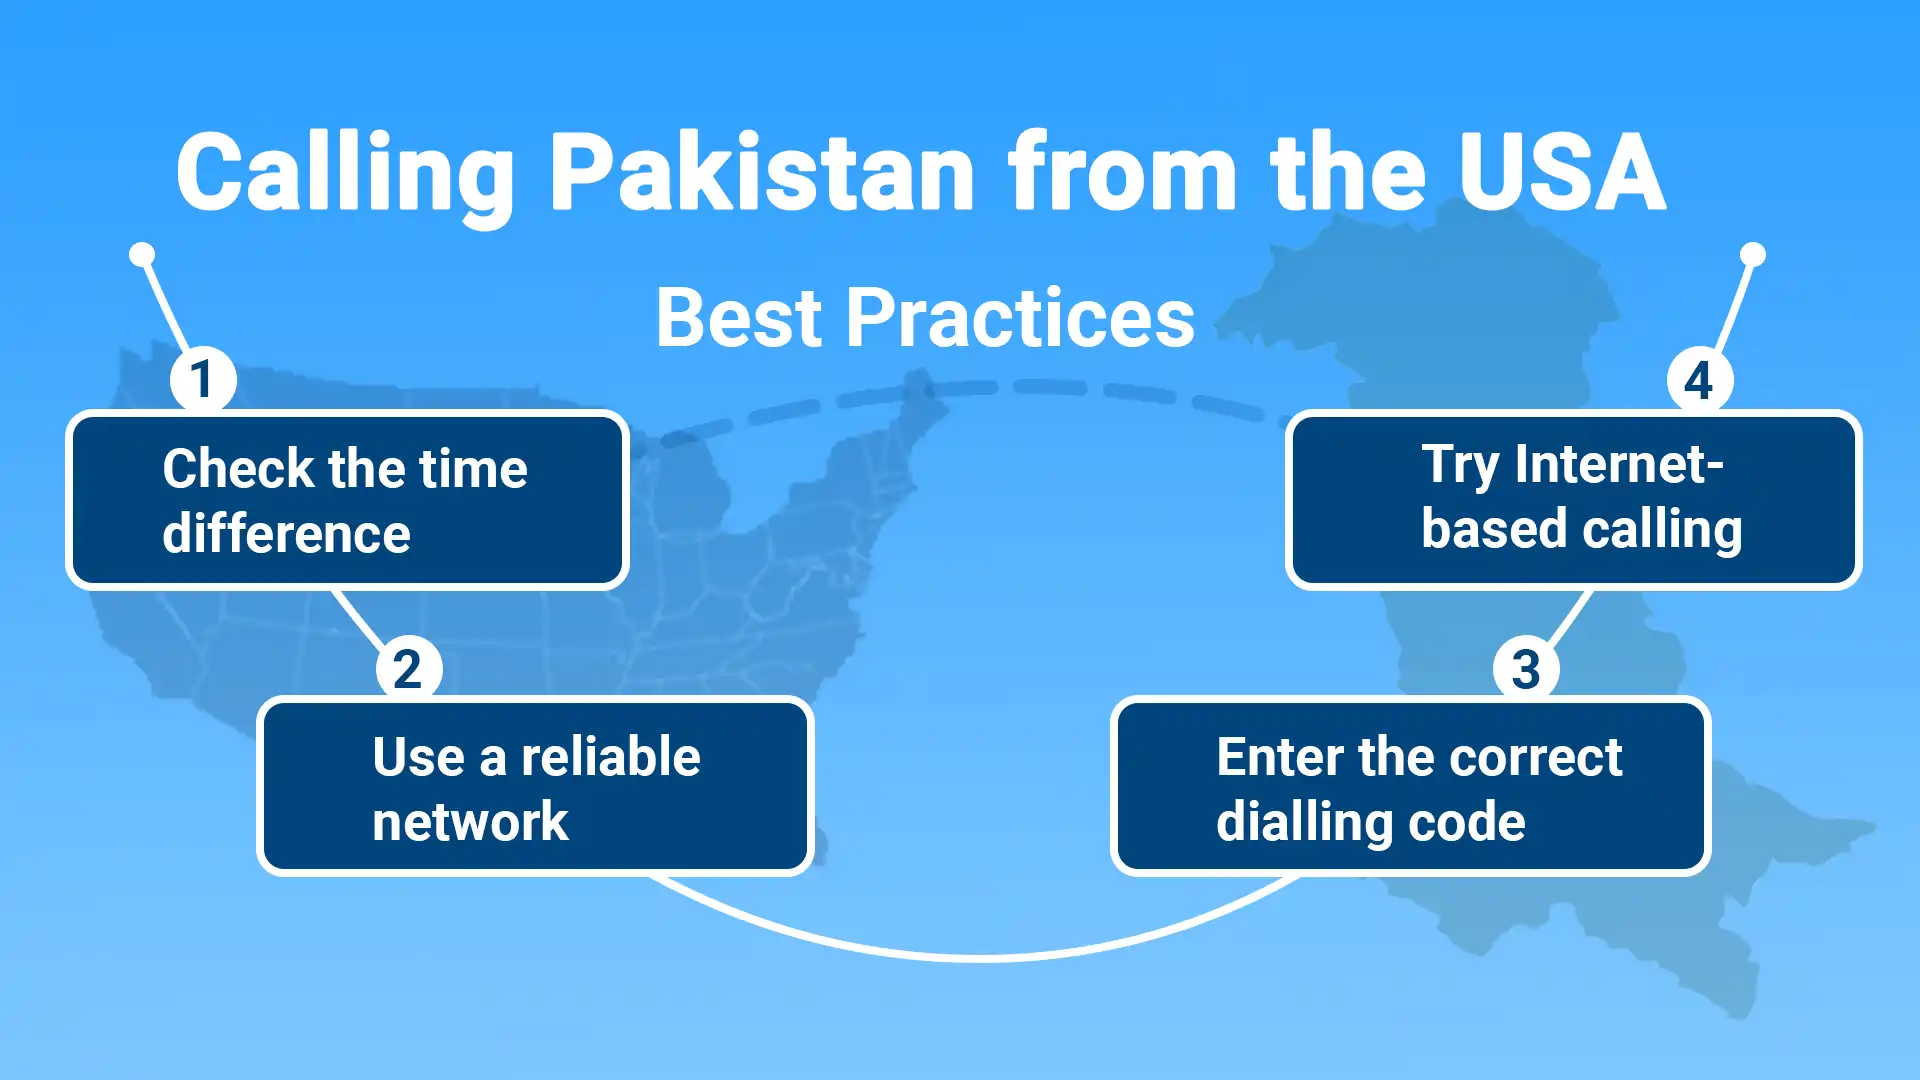 Best practices for calling Pakistan from the USA